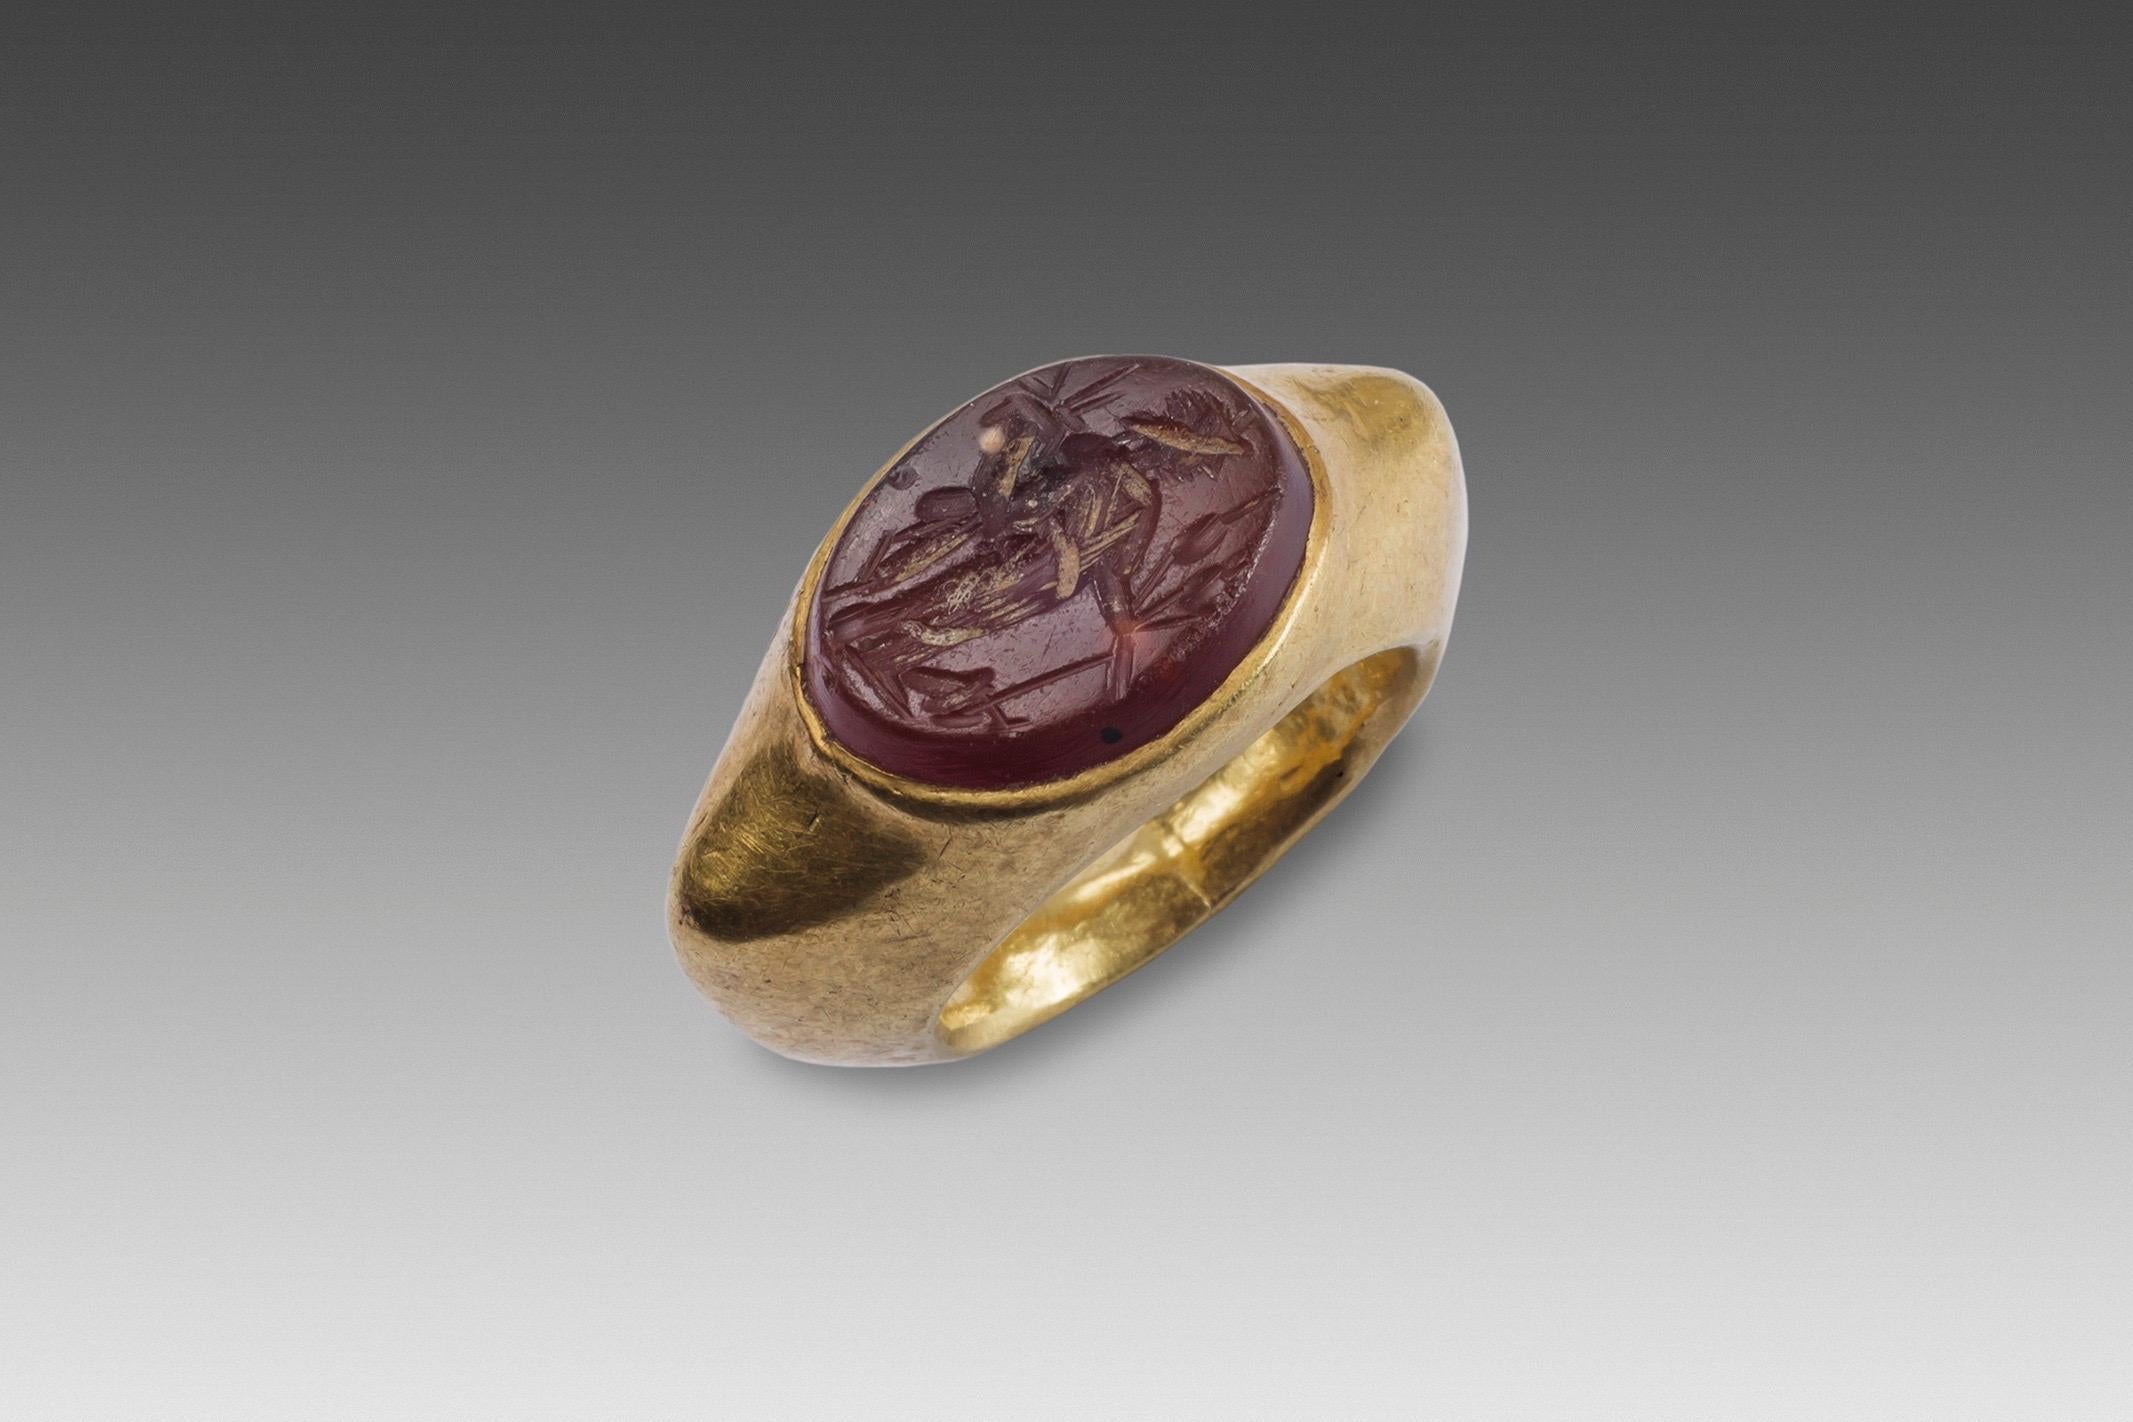 Ring with the Goddess Fortuna 
Roman art, beginning of the imperial era (1st-2nd century AD)
Carnelian
Measure: D 2.35 cm
 
 The ring, almost circular in shape at the bottom, has an angular shoulder; it was carefully hammered into a thin sheet of